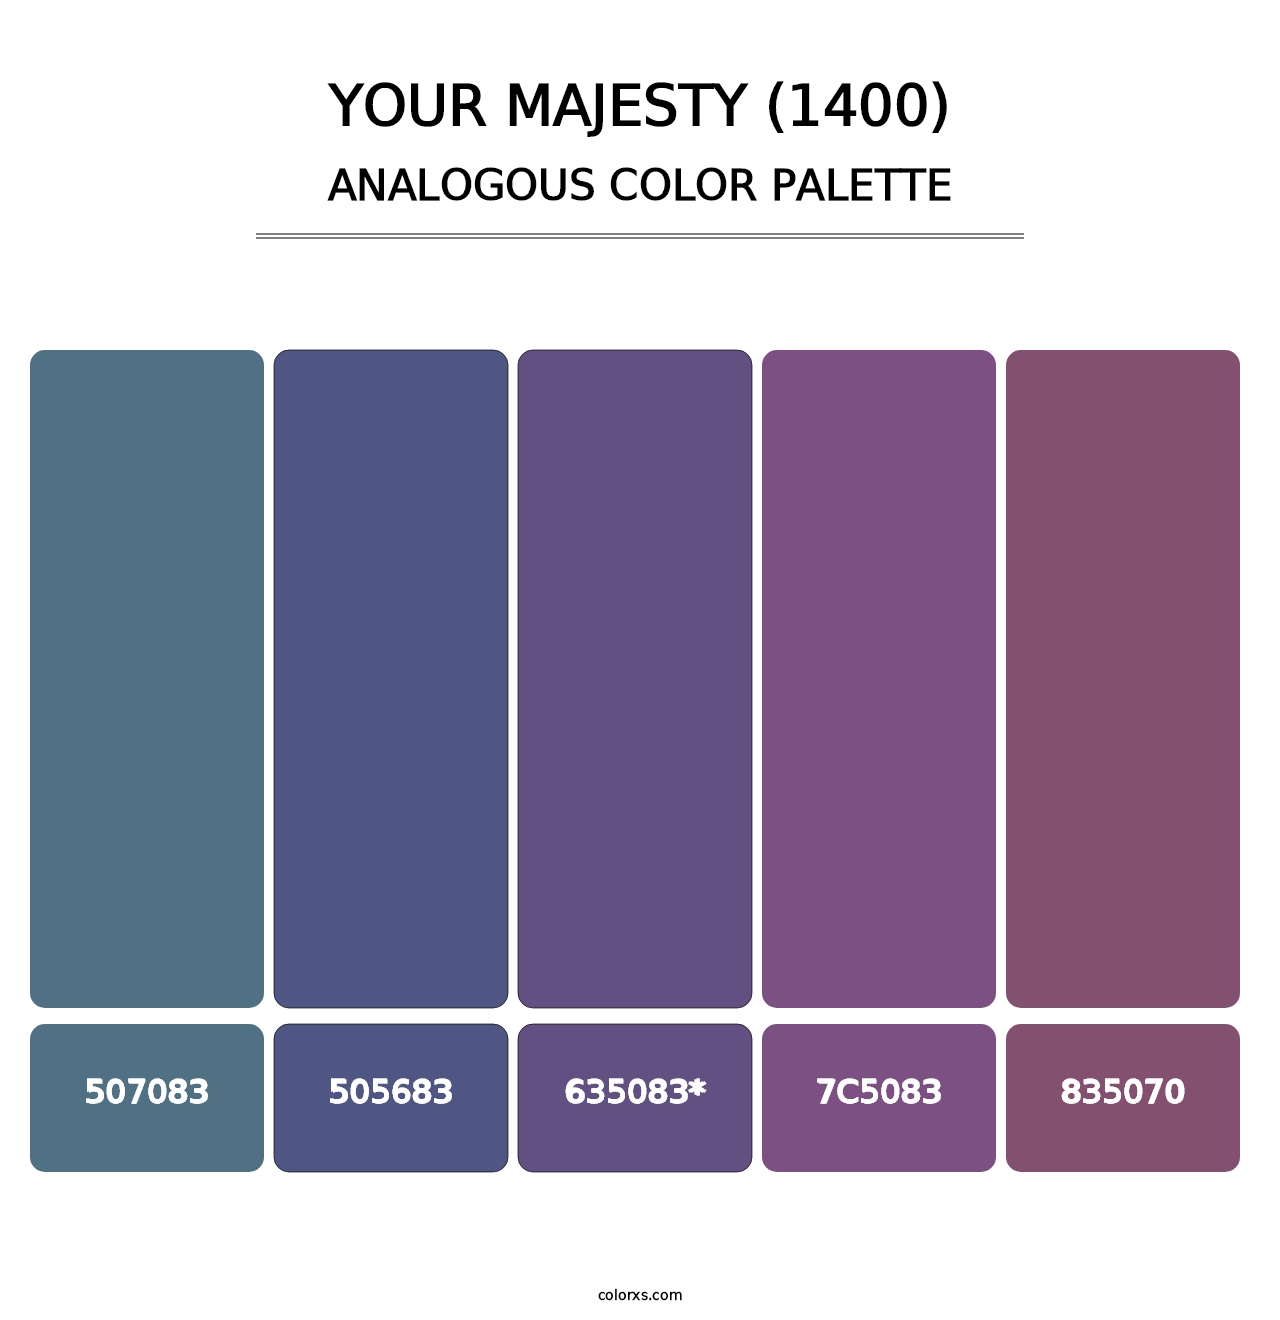 Your Majesty (1400) - Analogous Color Palette